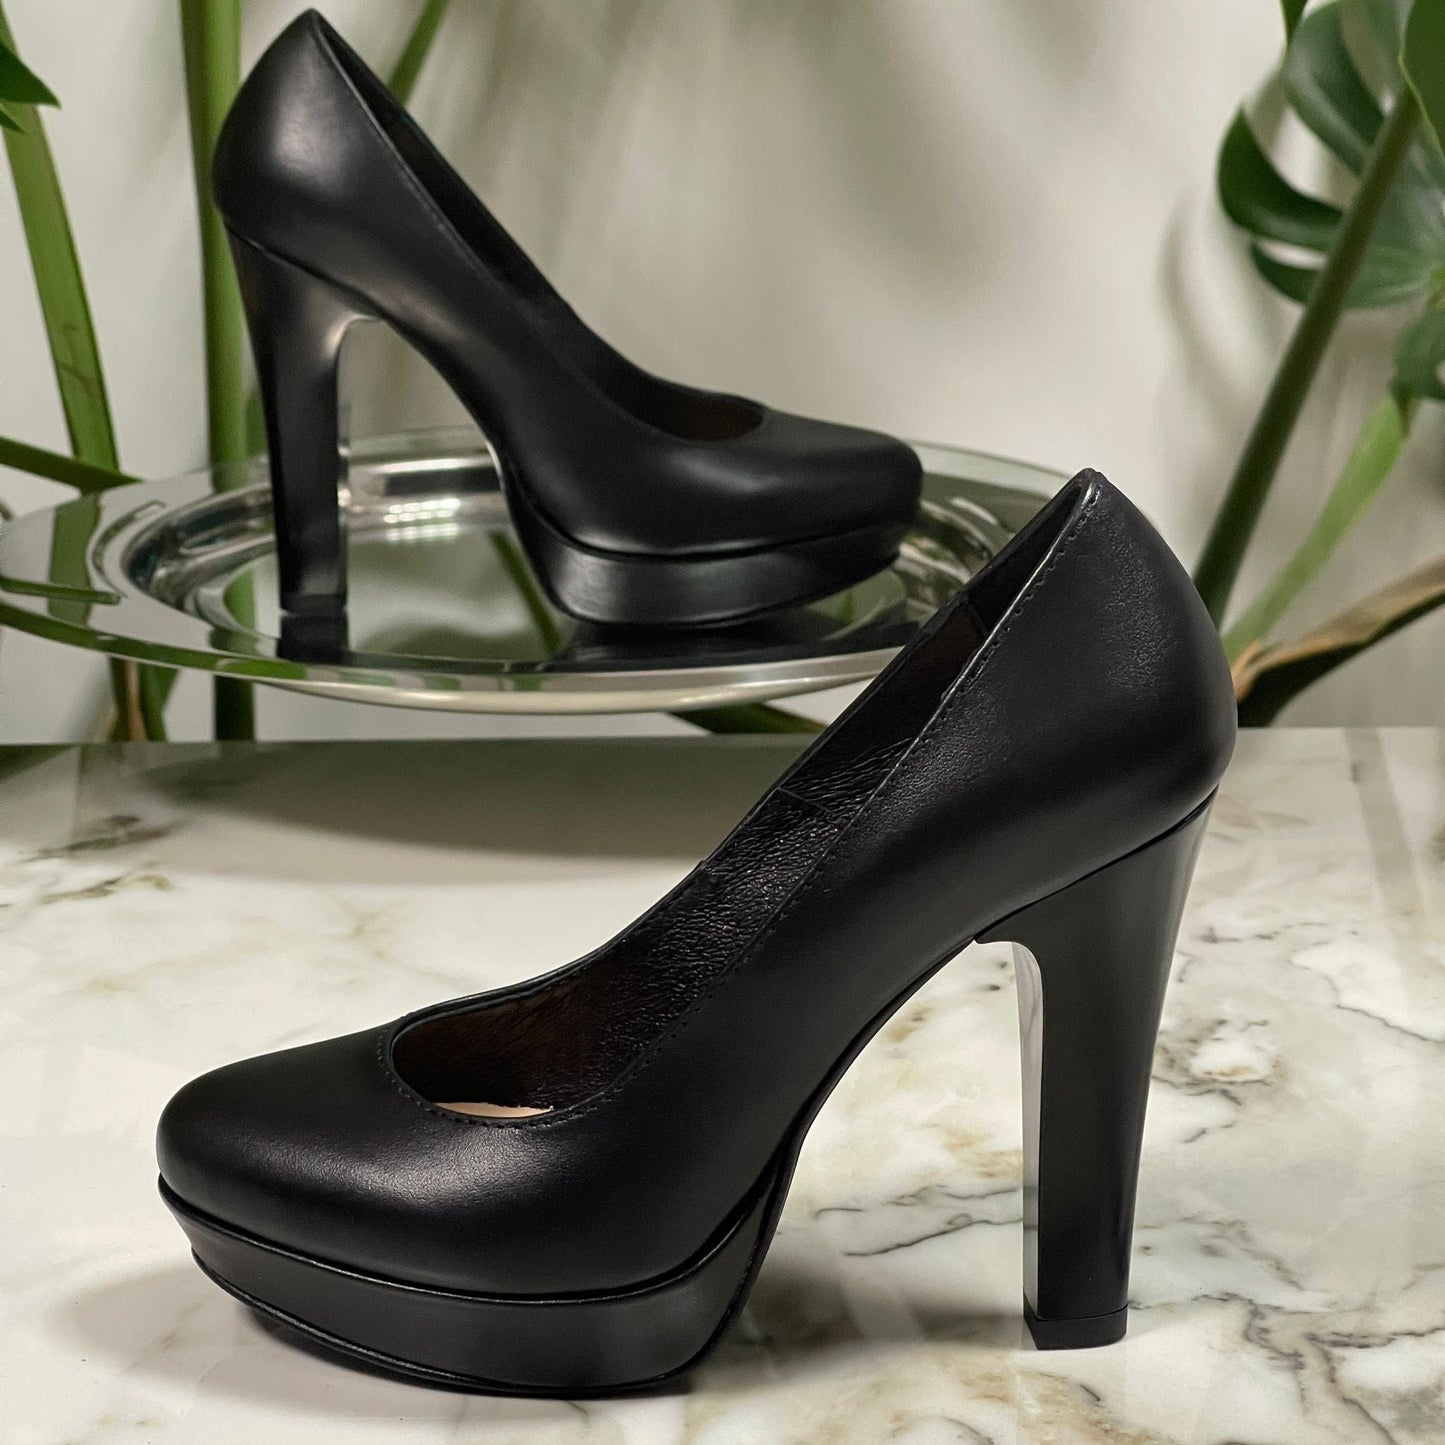 Small size platform court heels in black leather